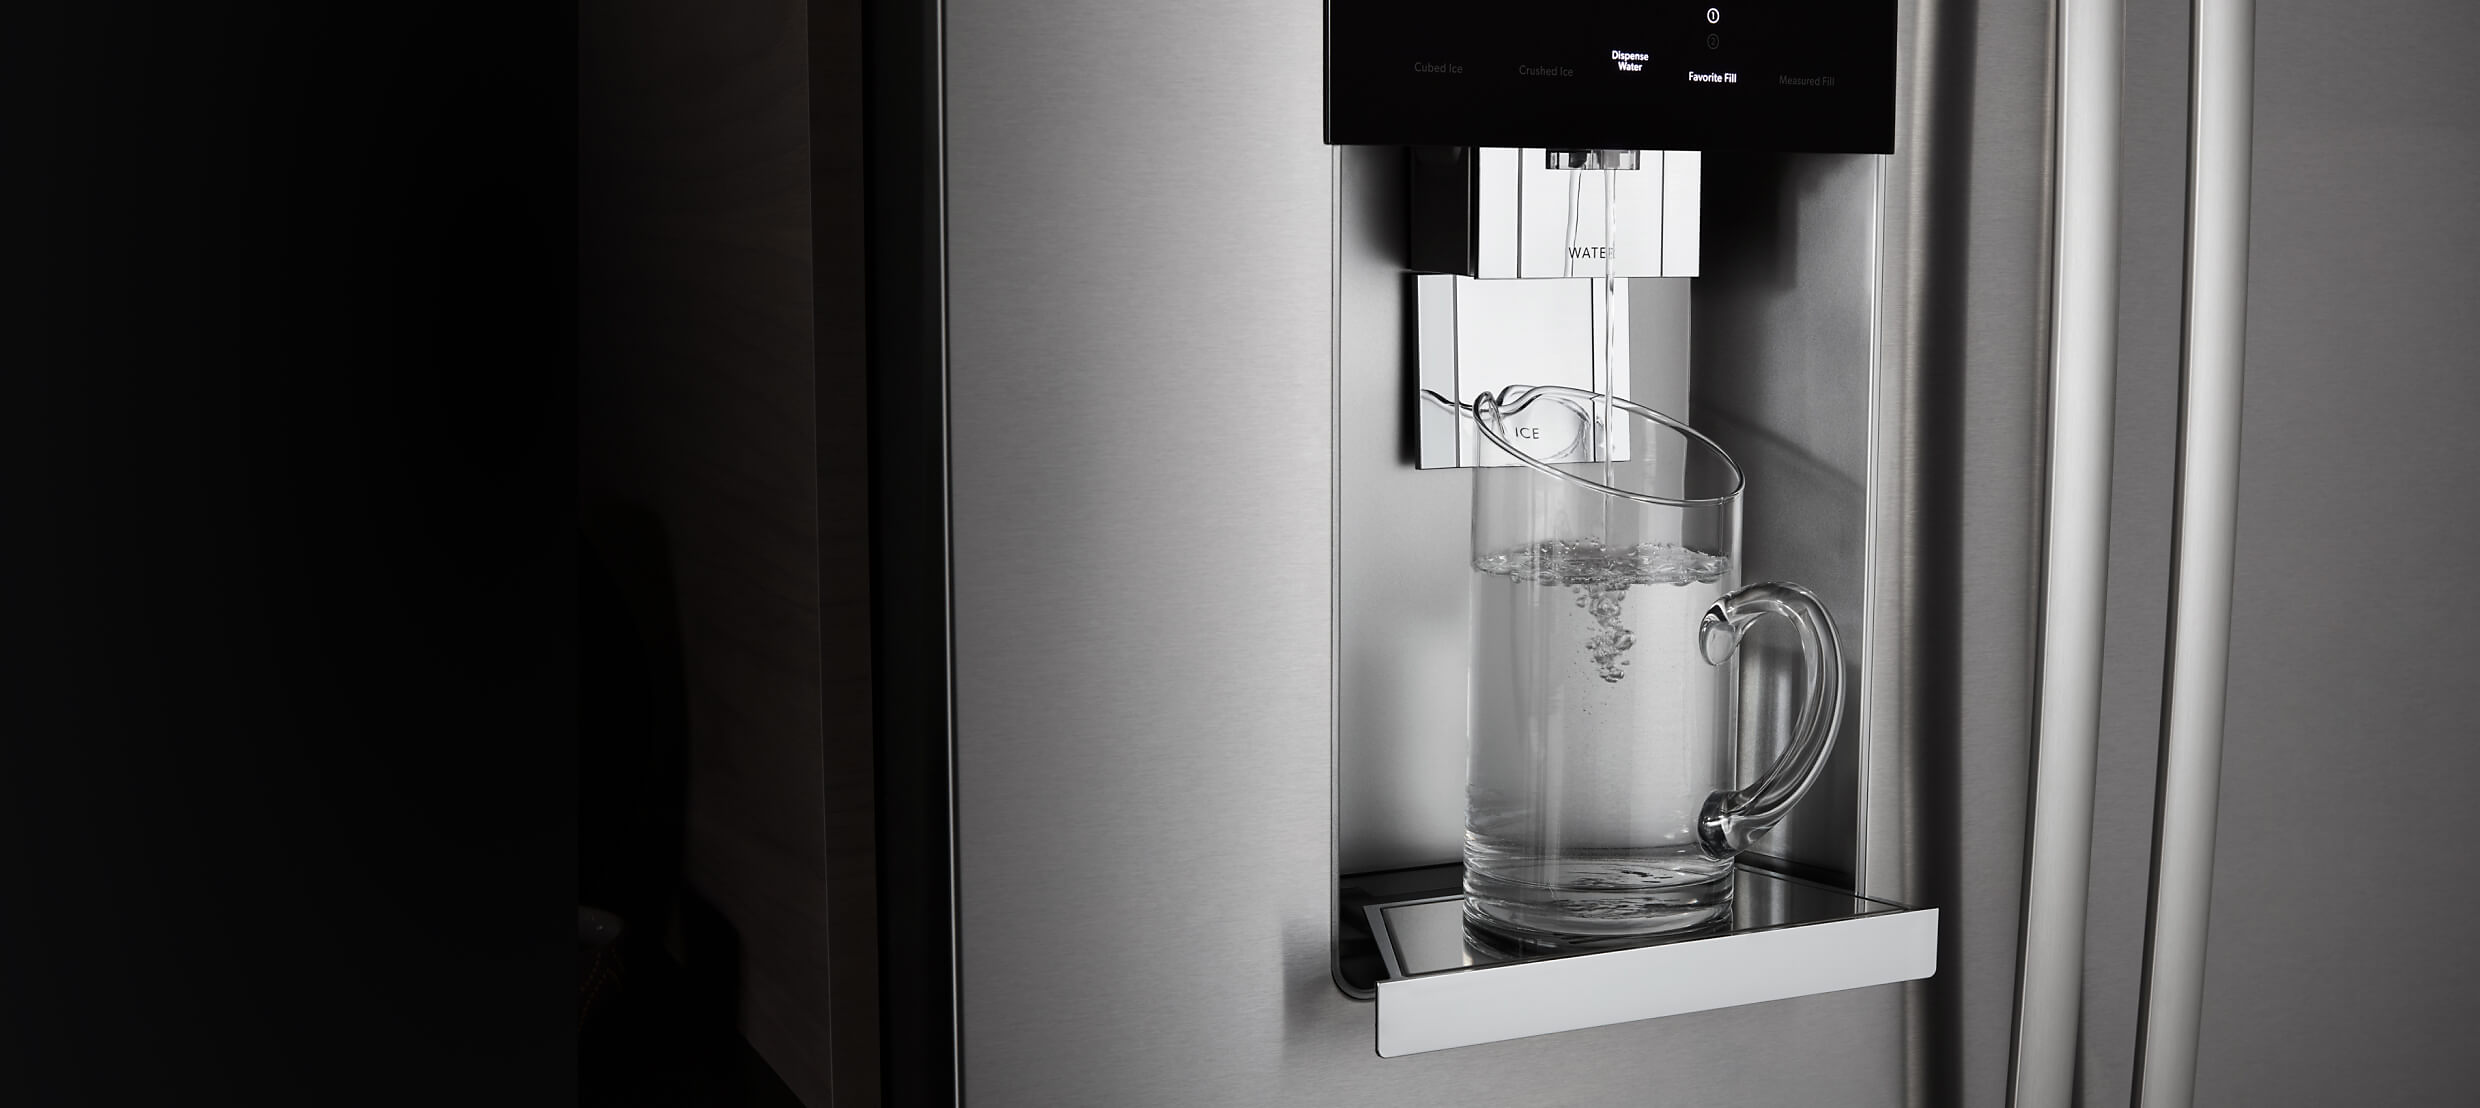  The front of a JennAir® built-in refrigerator, showing water being poured into a glass from the external dispenser.